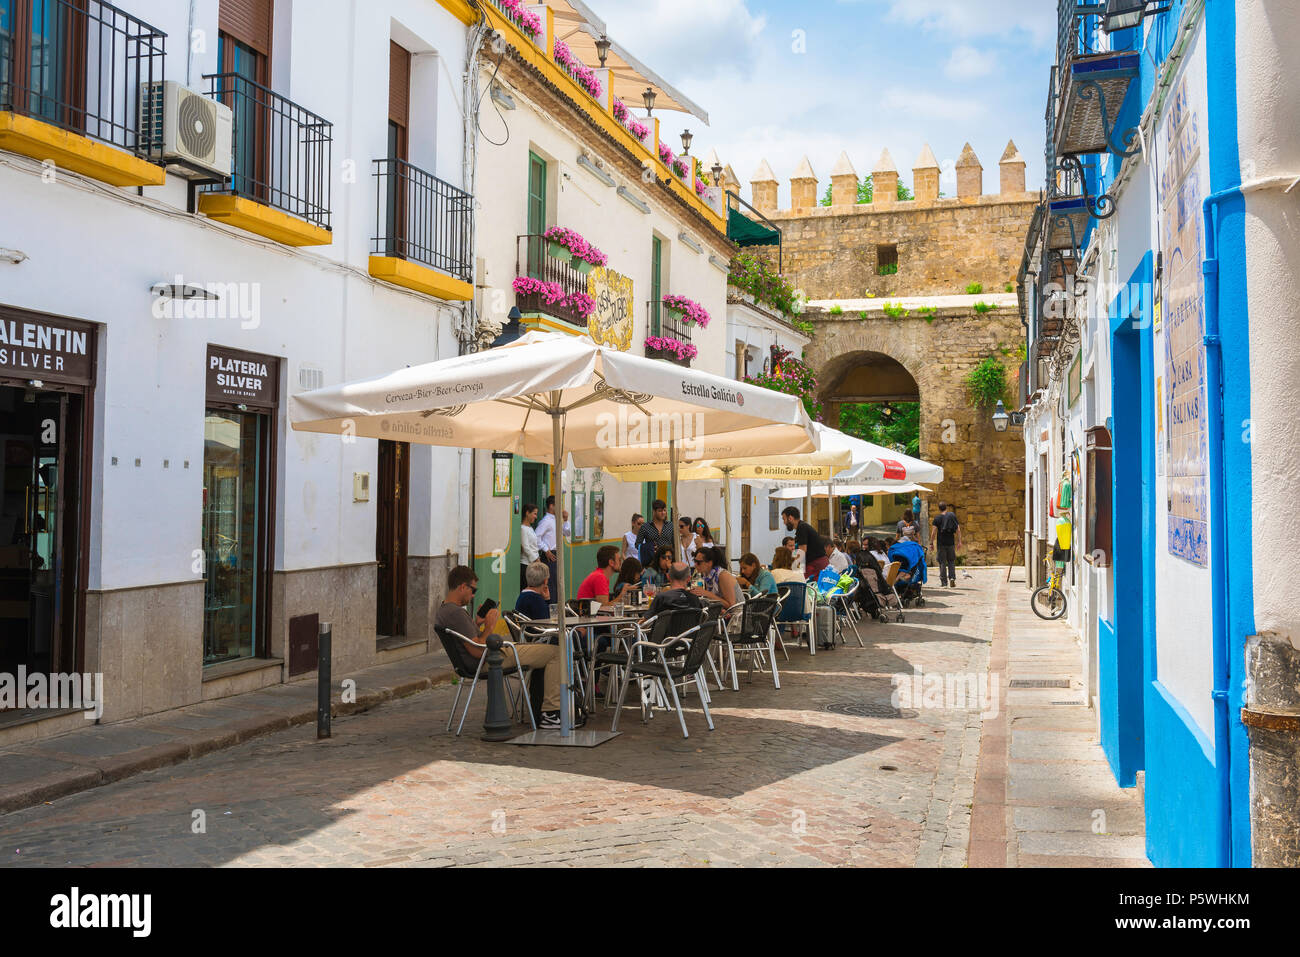 Cordoba Spain cafe, view of tourists relaxing on a cafe terrace in a street in the Juderia (old Jewish) quarter of Cordoba (Cordova) Andalucia, Spain. Stock Photo